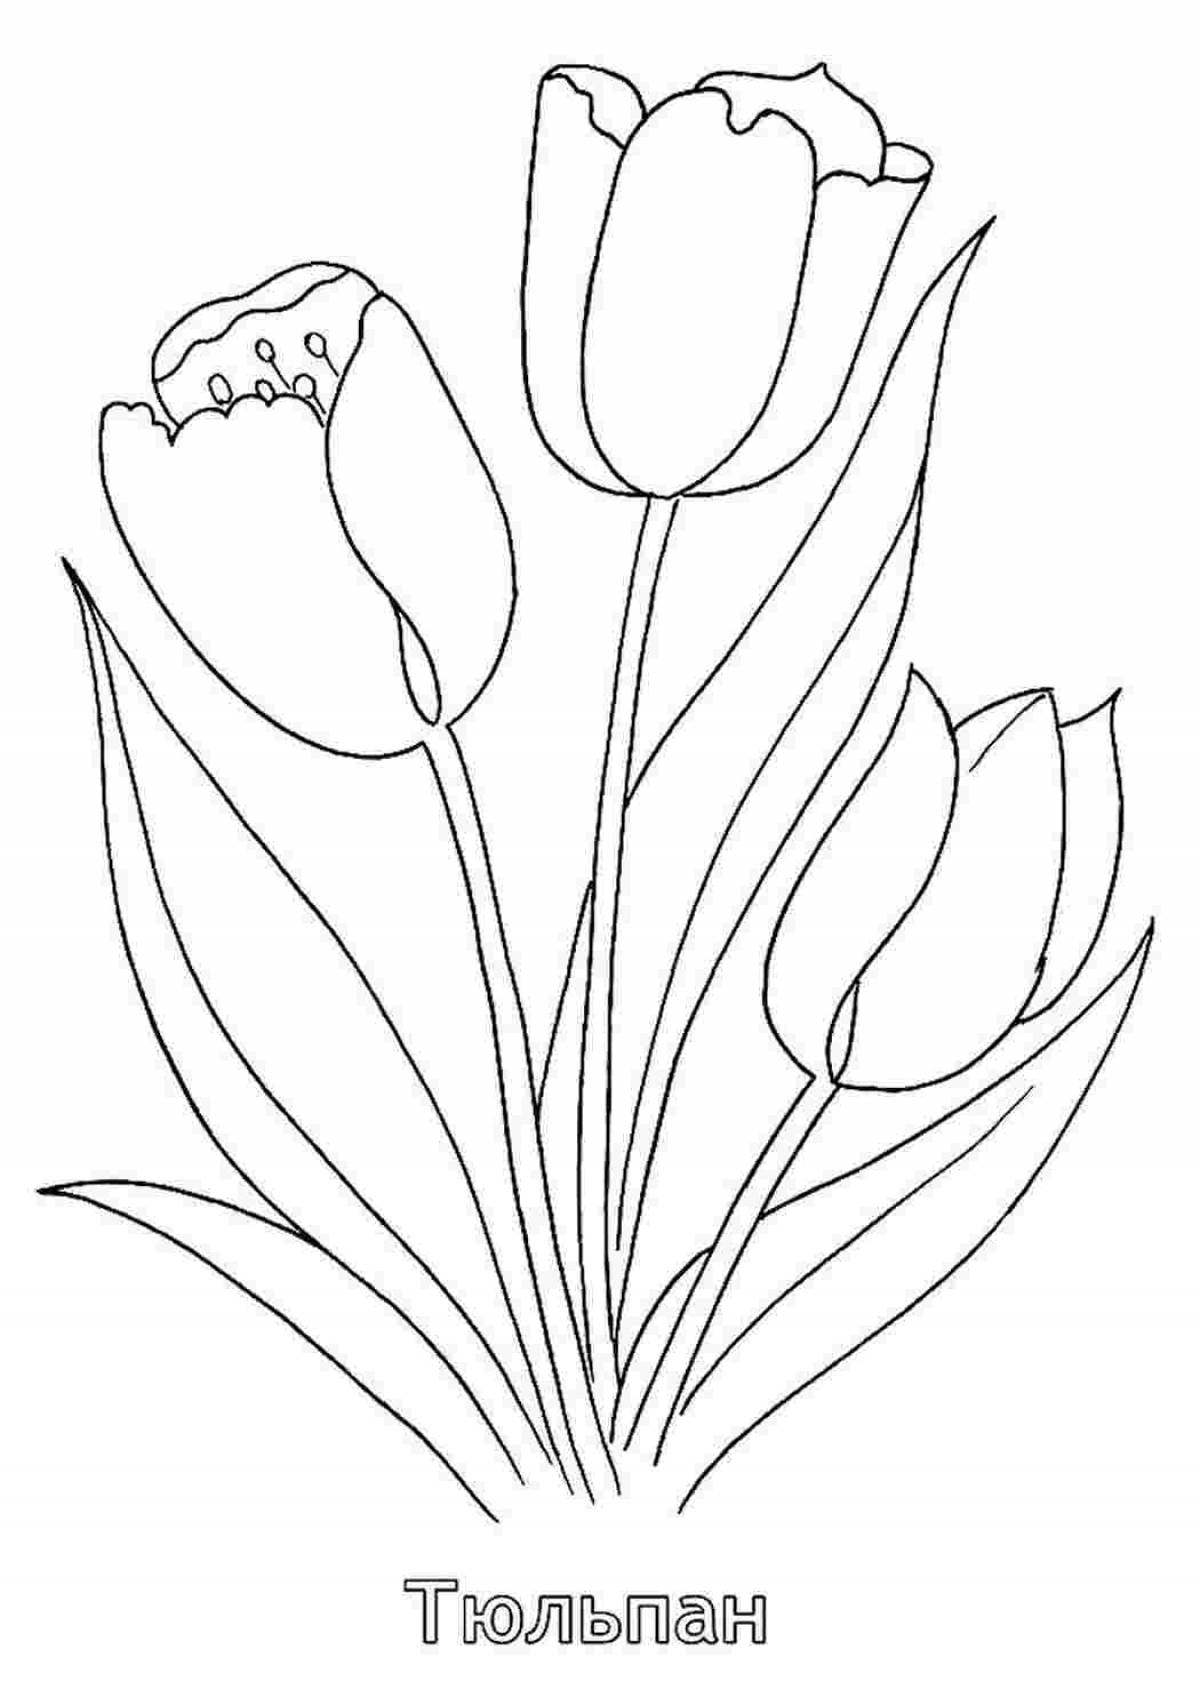 Exciting tulip coloring page